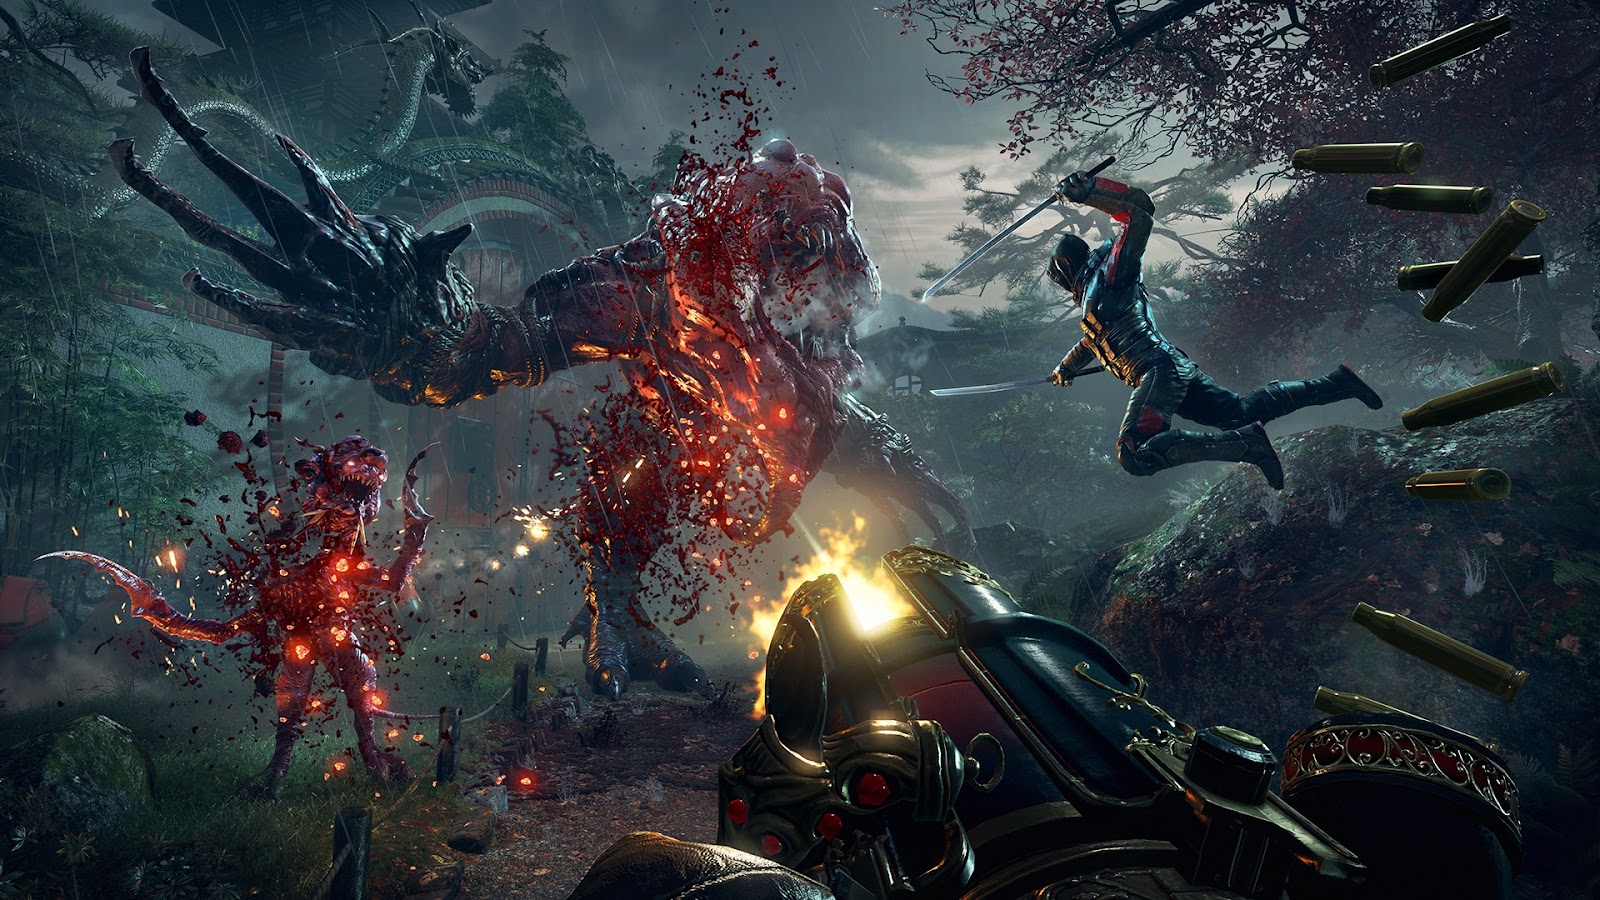  Shadow Warrior 3 and DOOM are first-person shooter games